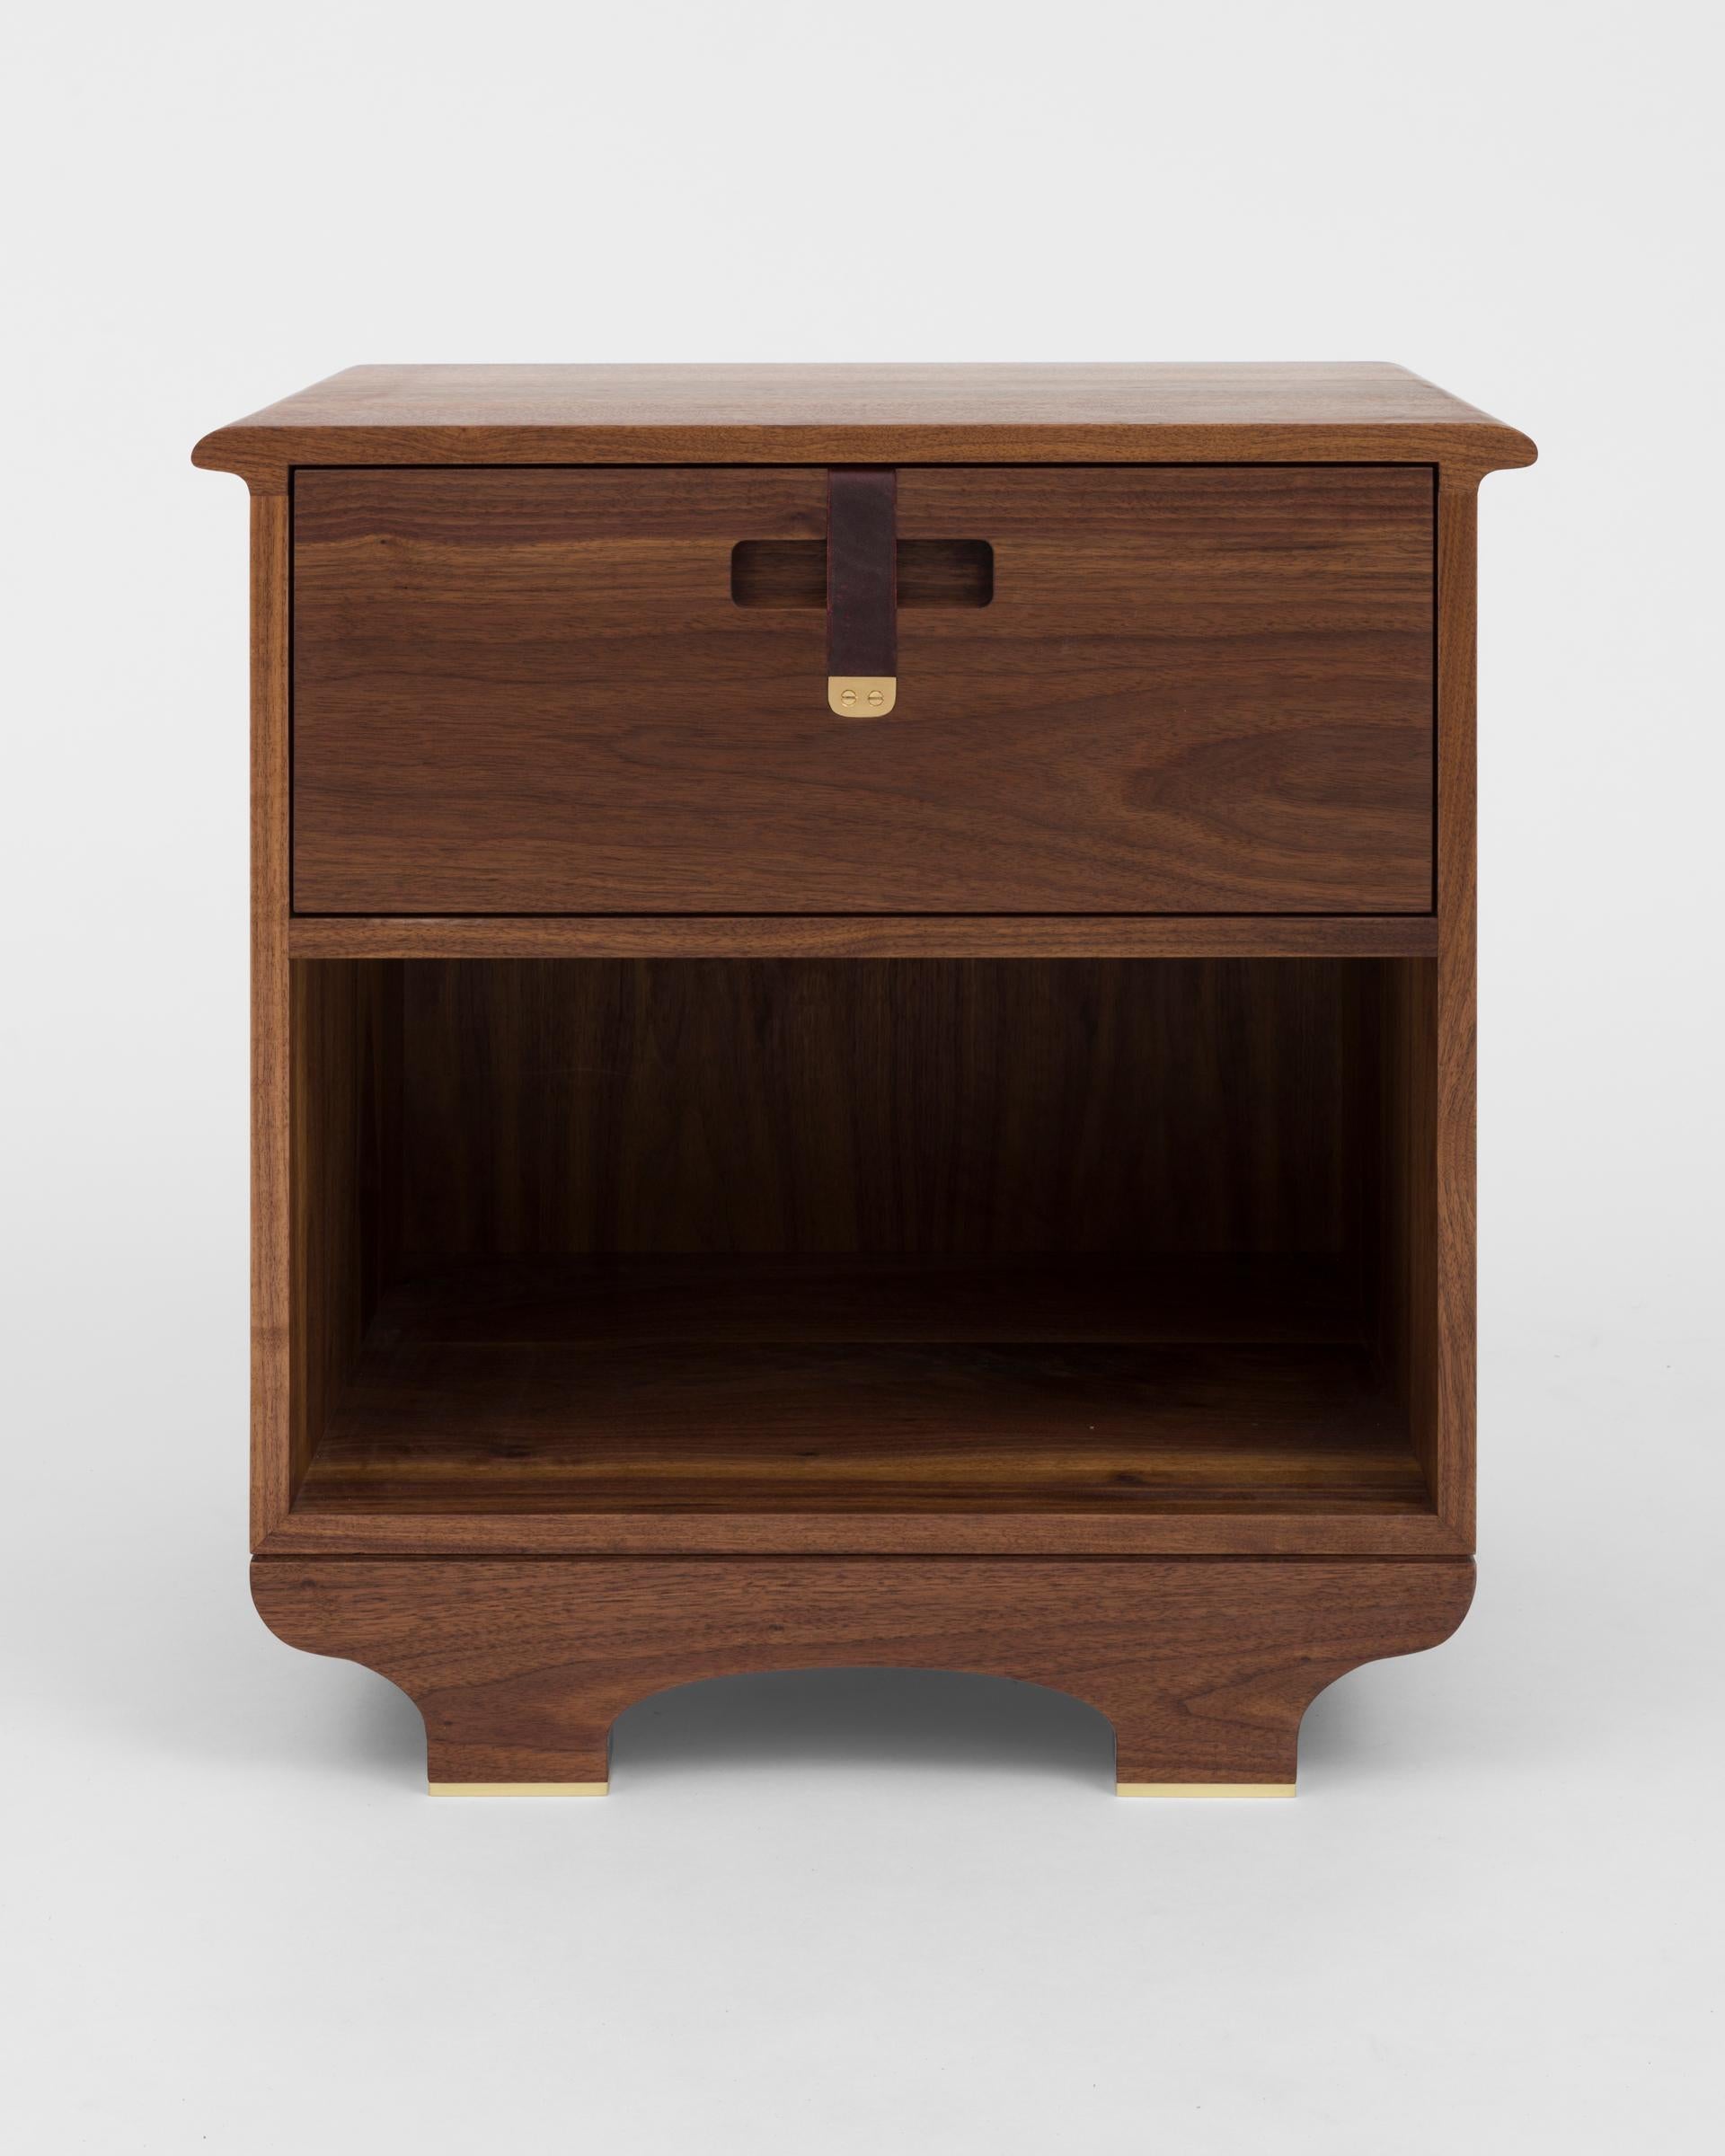 We've adapted our Kyoto Dresser design to serve as a bedside table with storage, in this case with a single drawer and open shelf beneath. This is a hybrid design which uses a prior version of our drawer pull that a client preferred, and so we